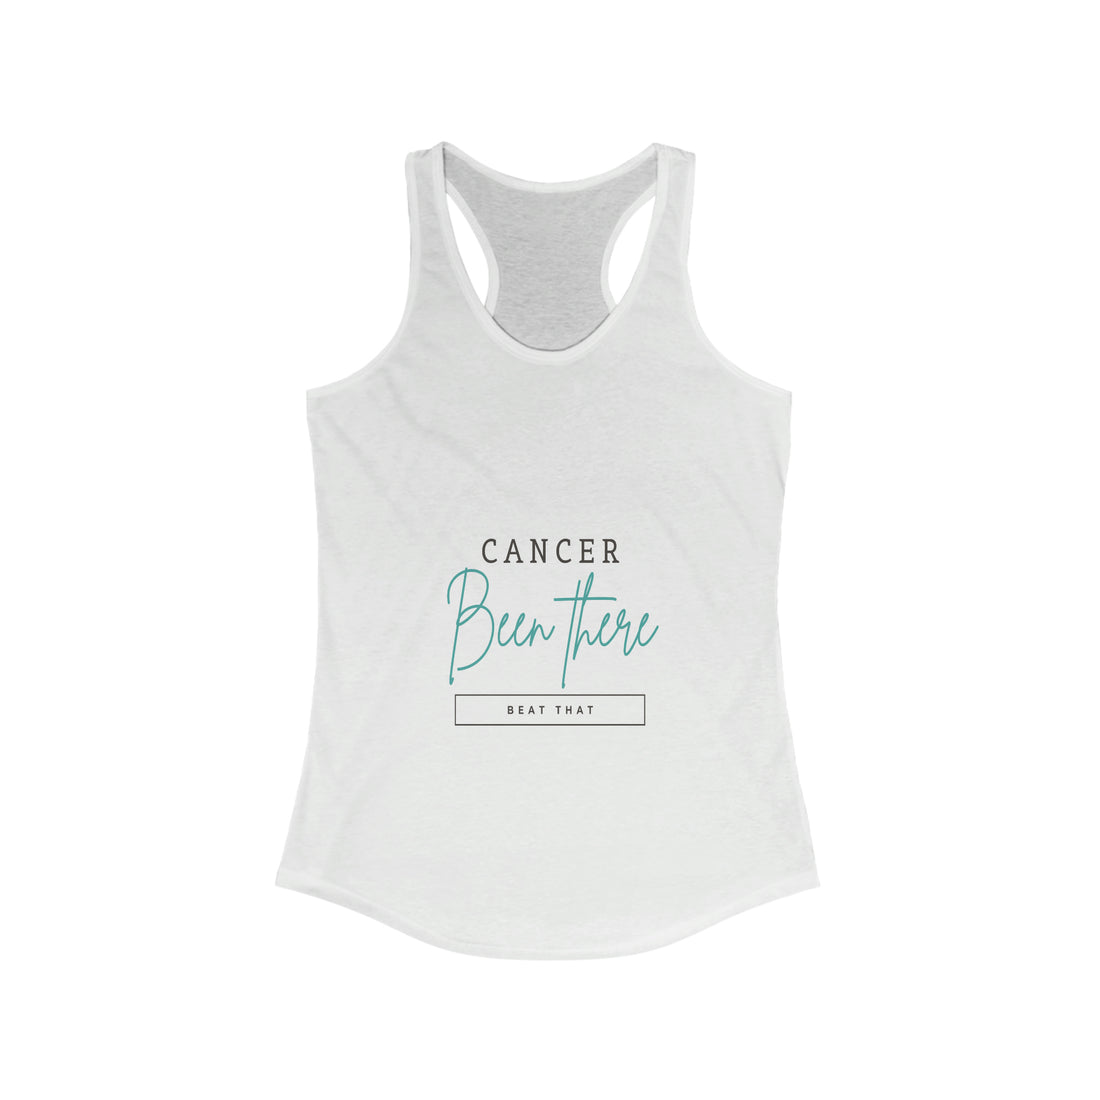 Cancer Been There Beat That - Racerback Tank Top